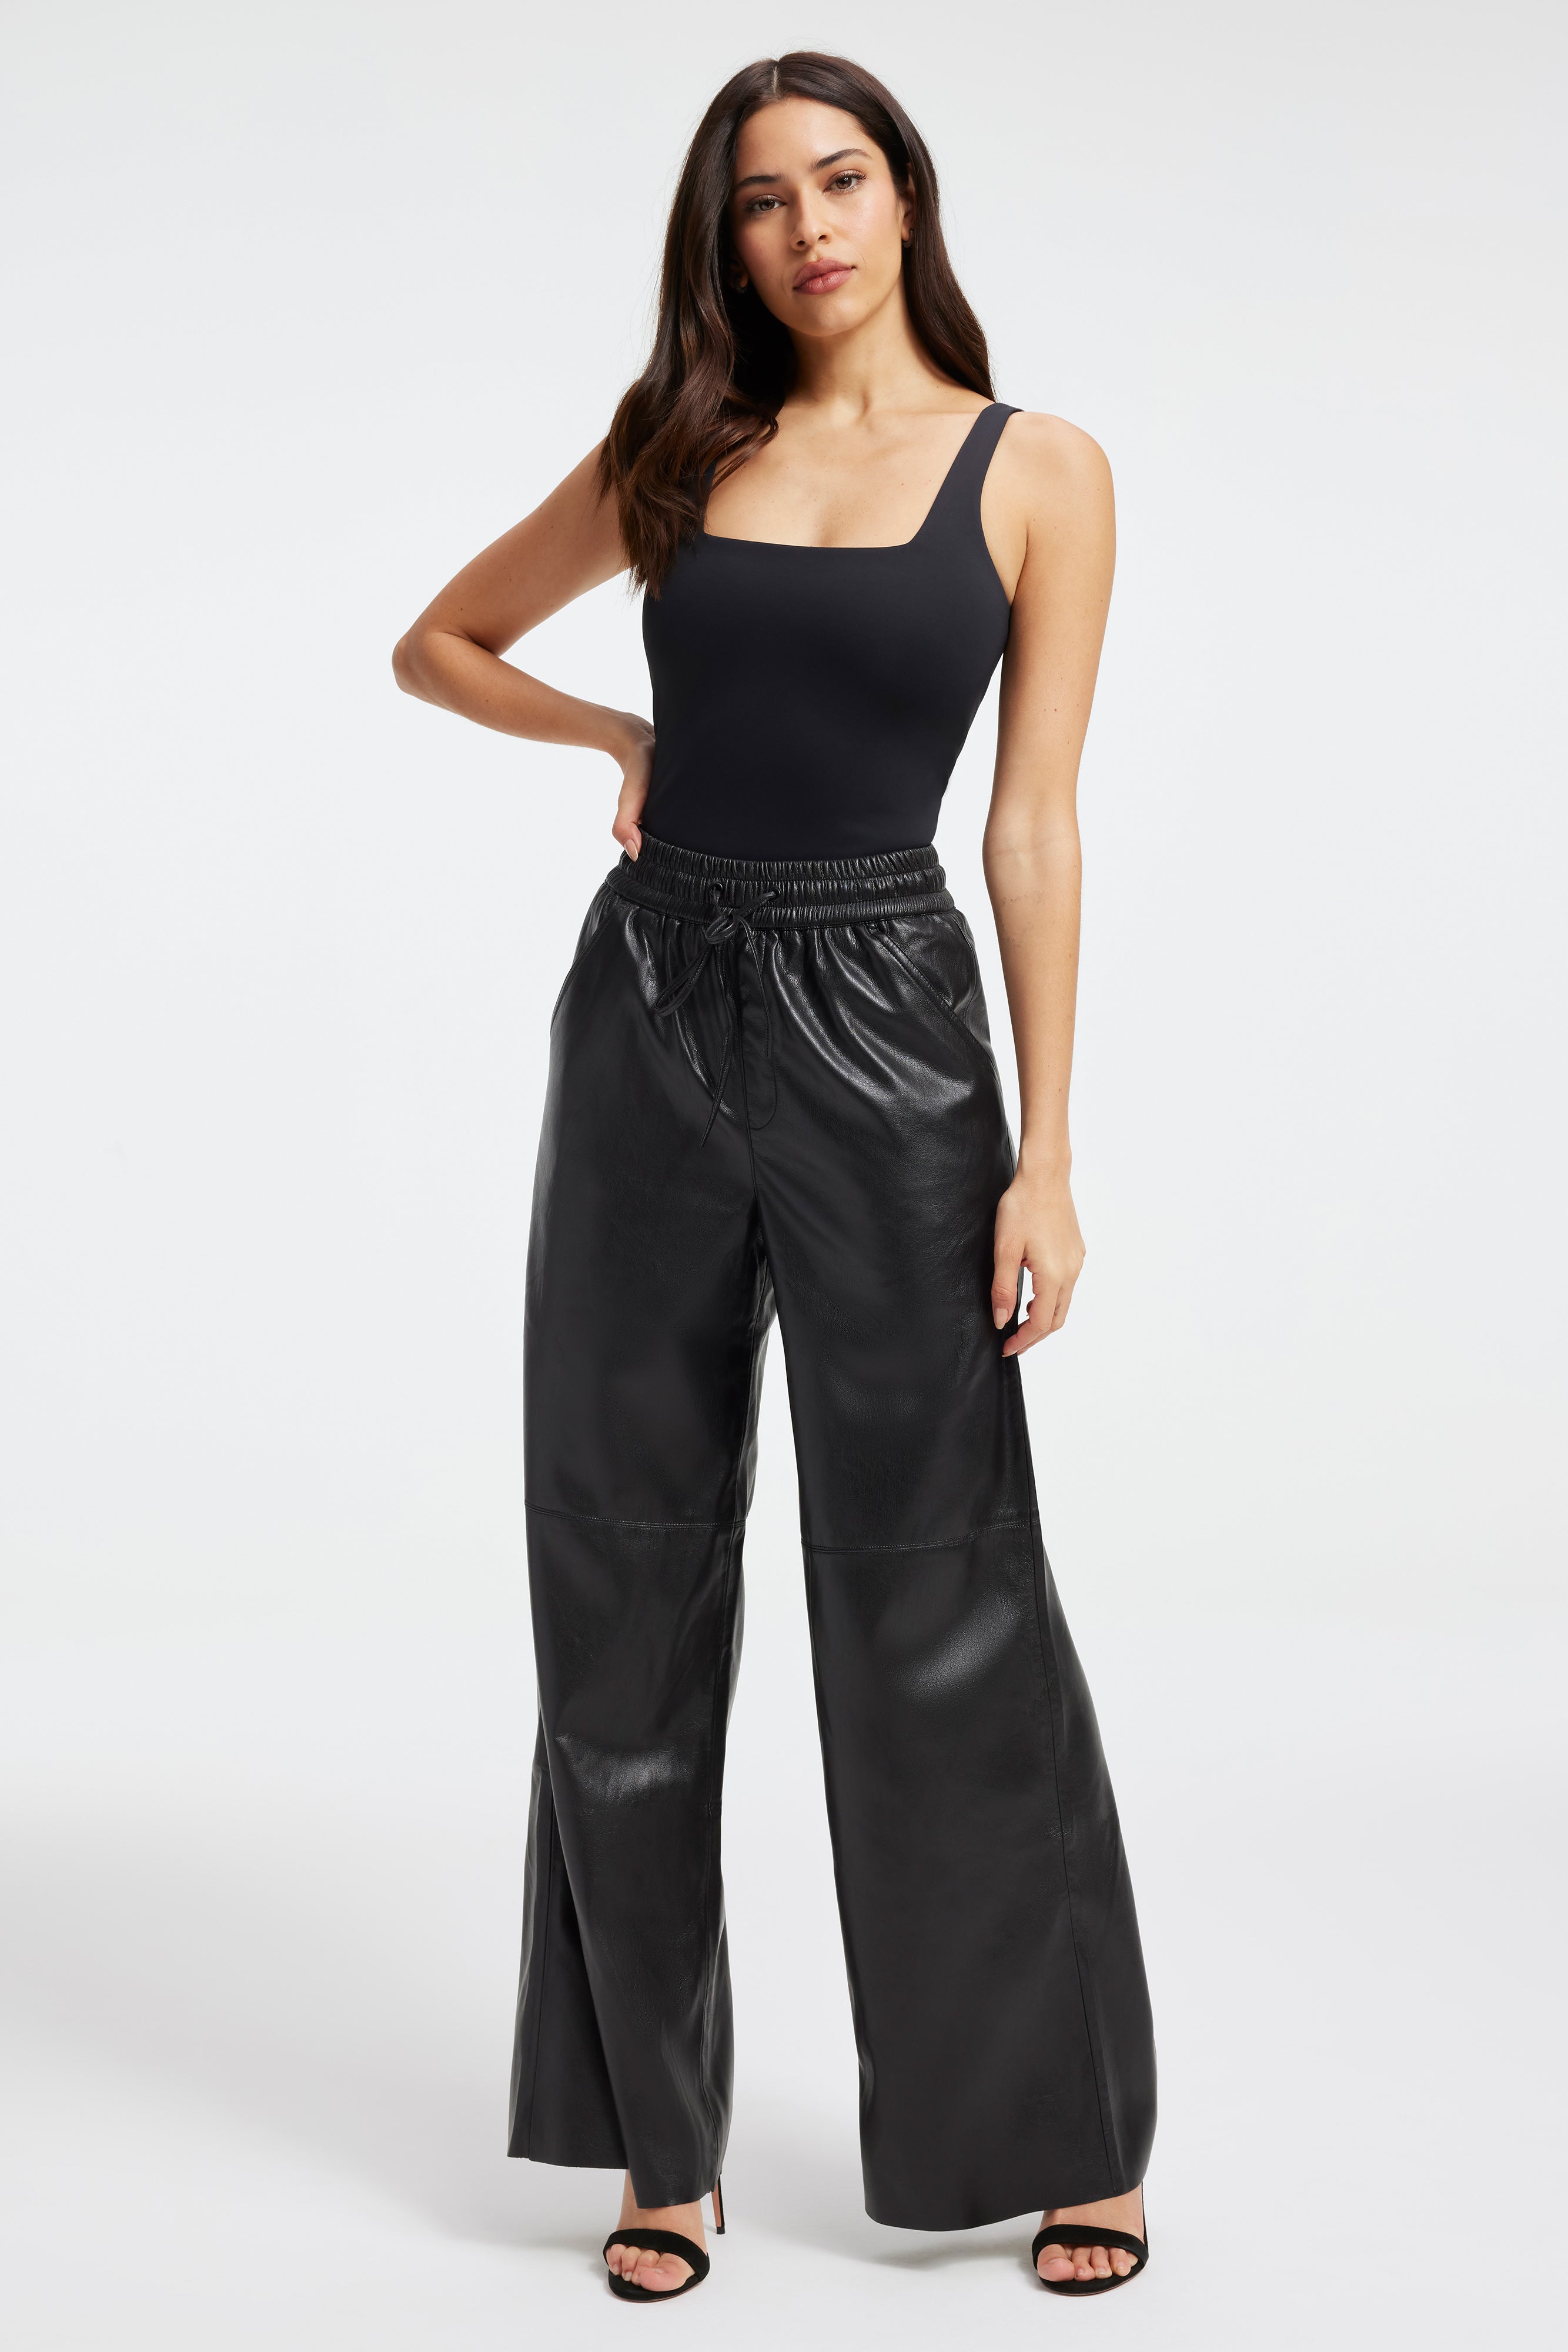 The Best Faux Leather Pants To Shop This Winter  Chatelaine